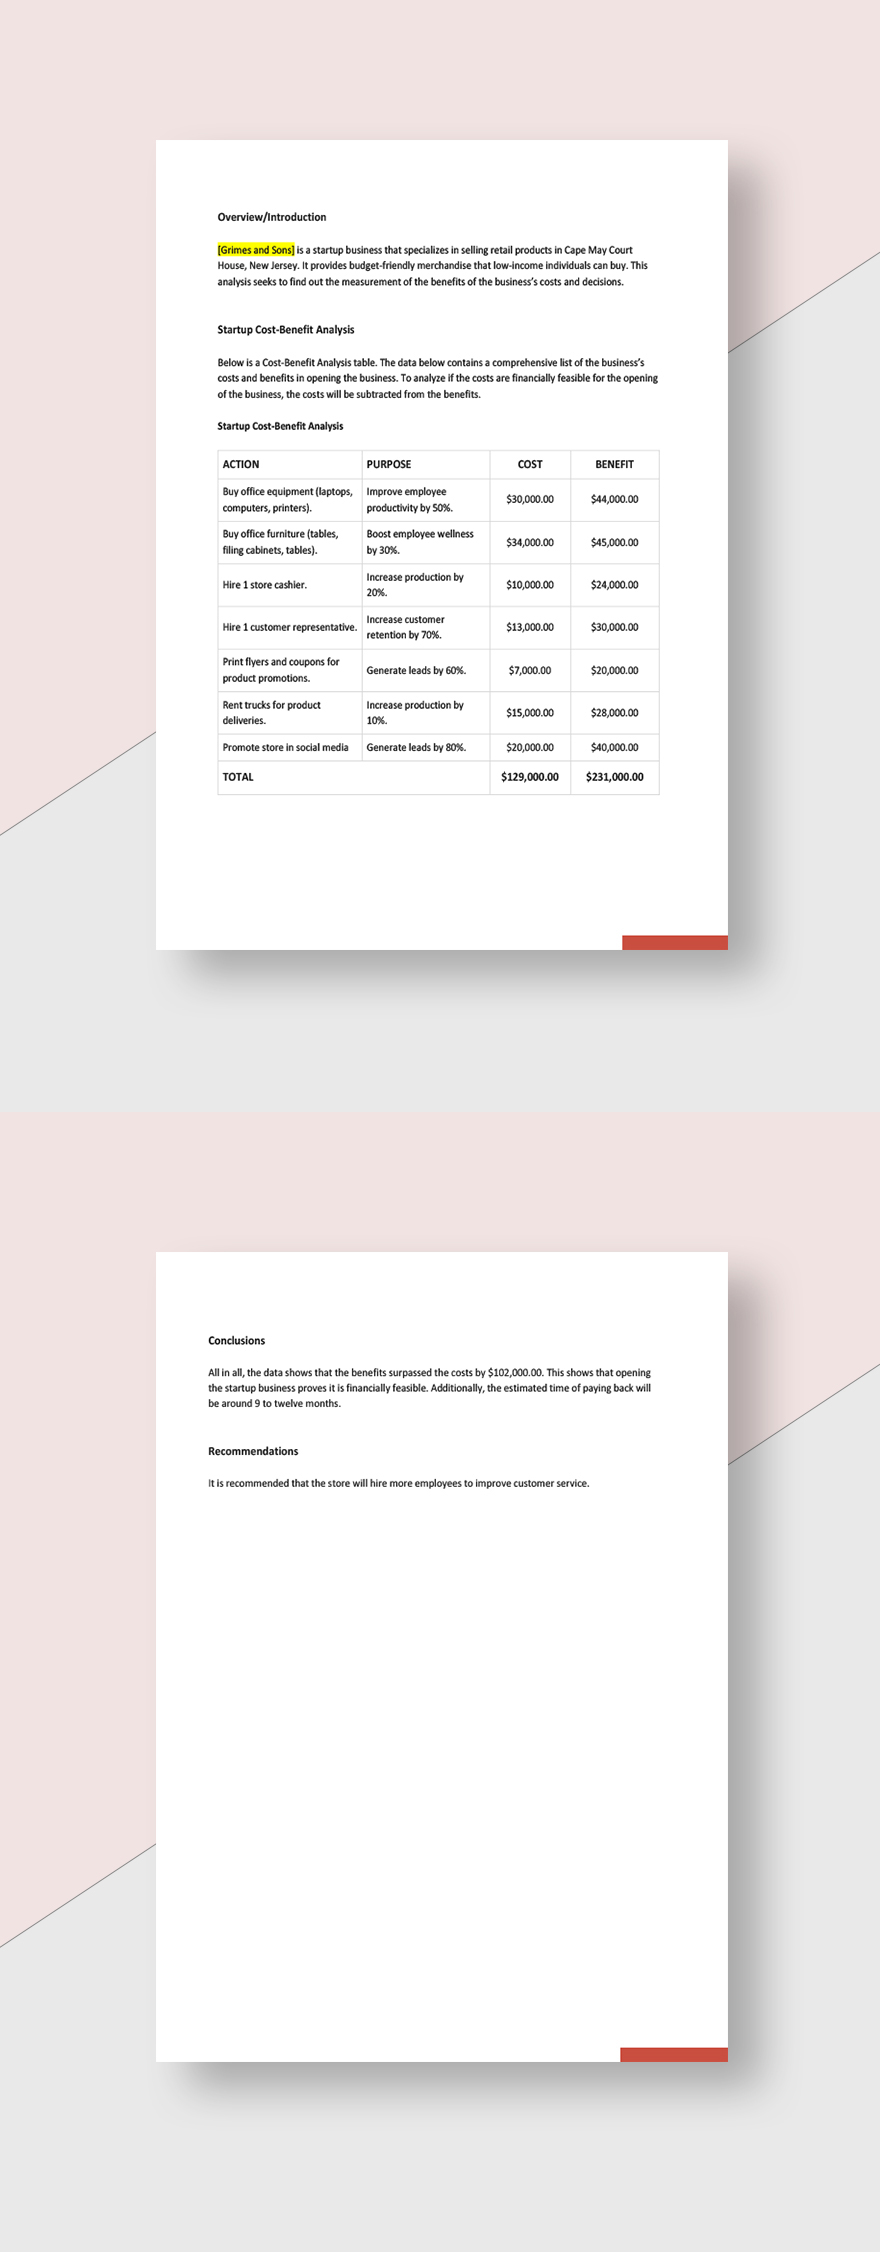 Editable Startup Cost Analysis Template